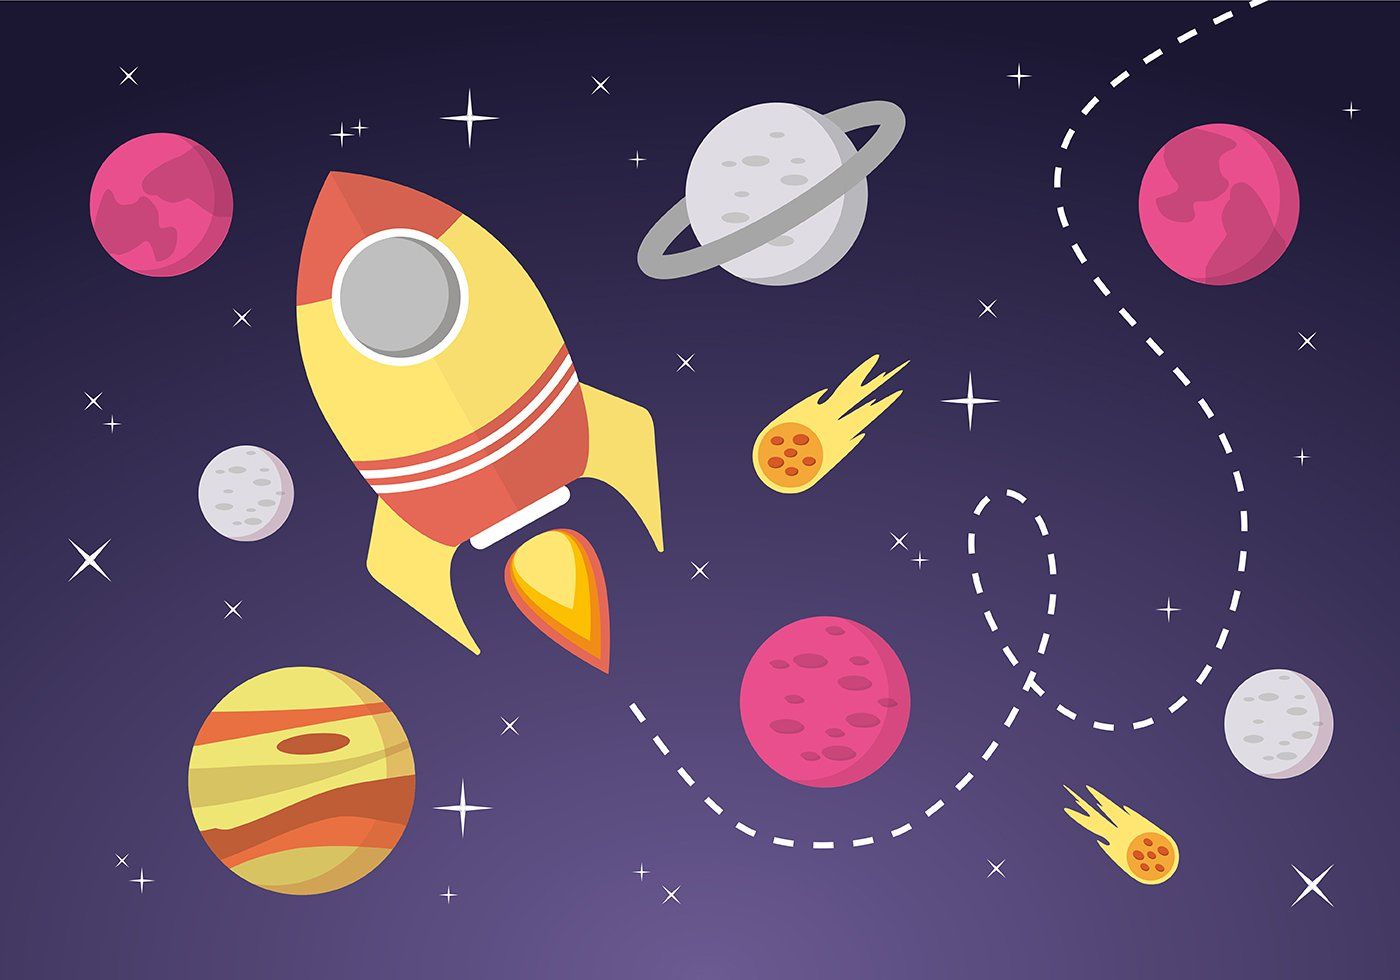 Space Background Free Vector Art - (9070 Free Downloads)